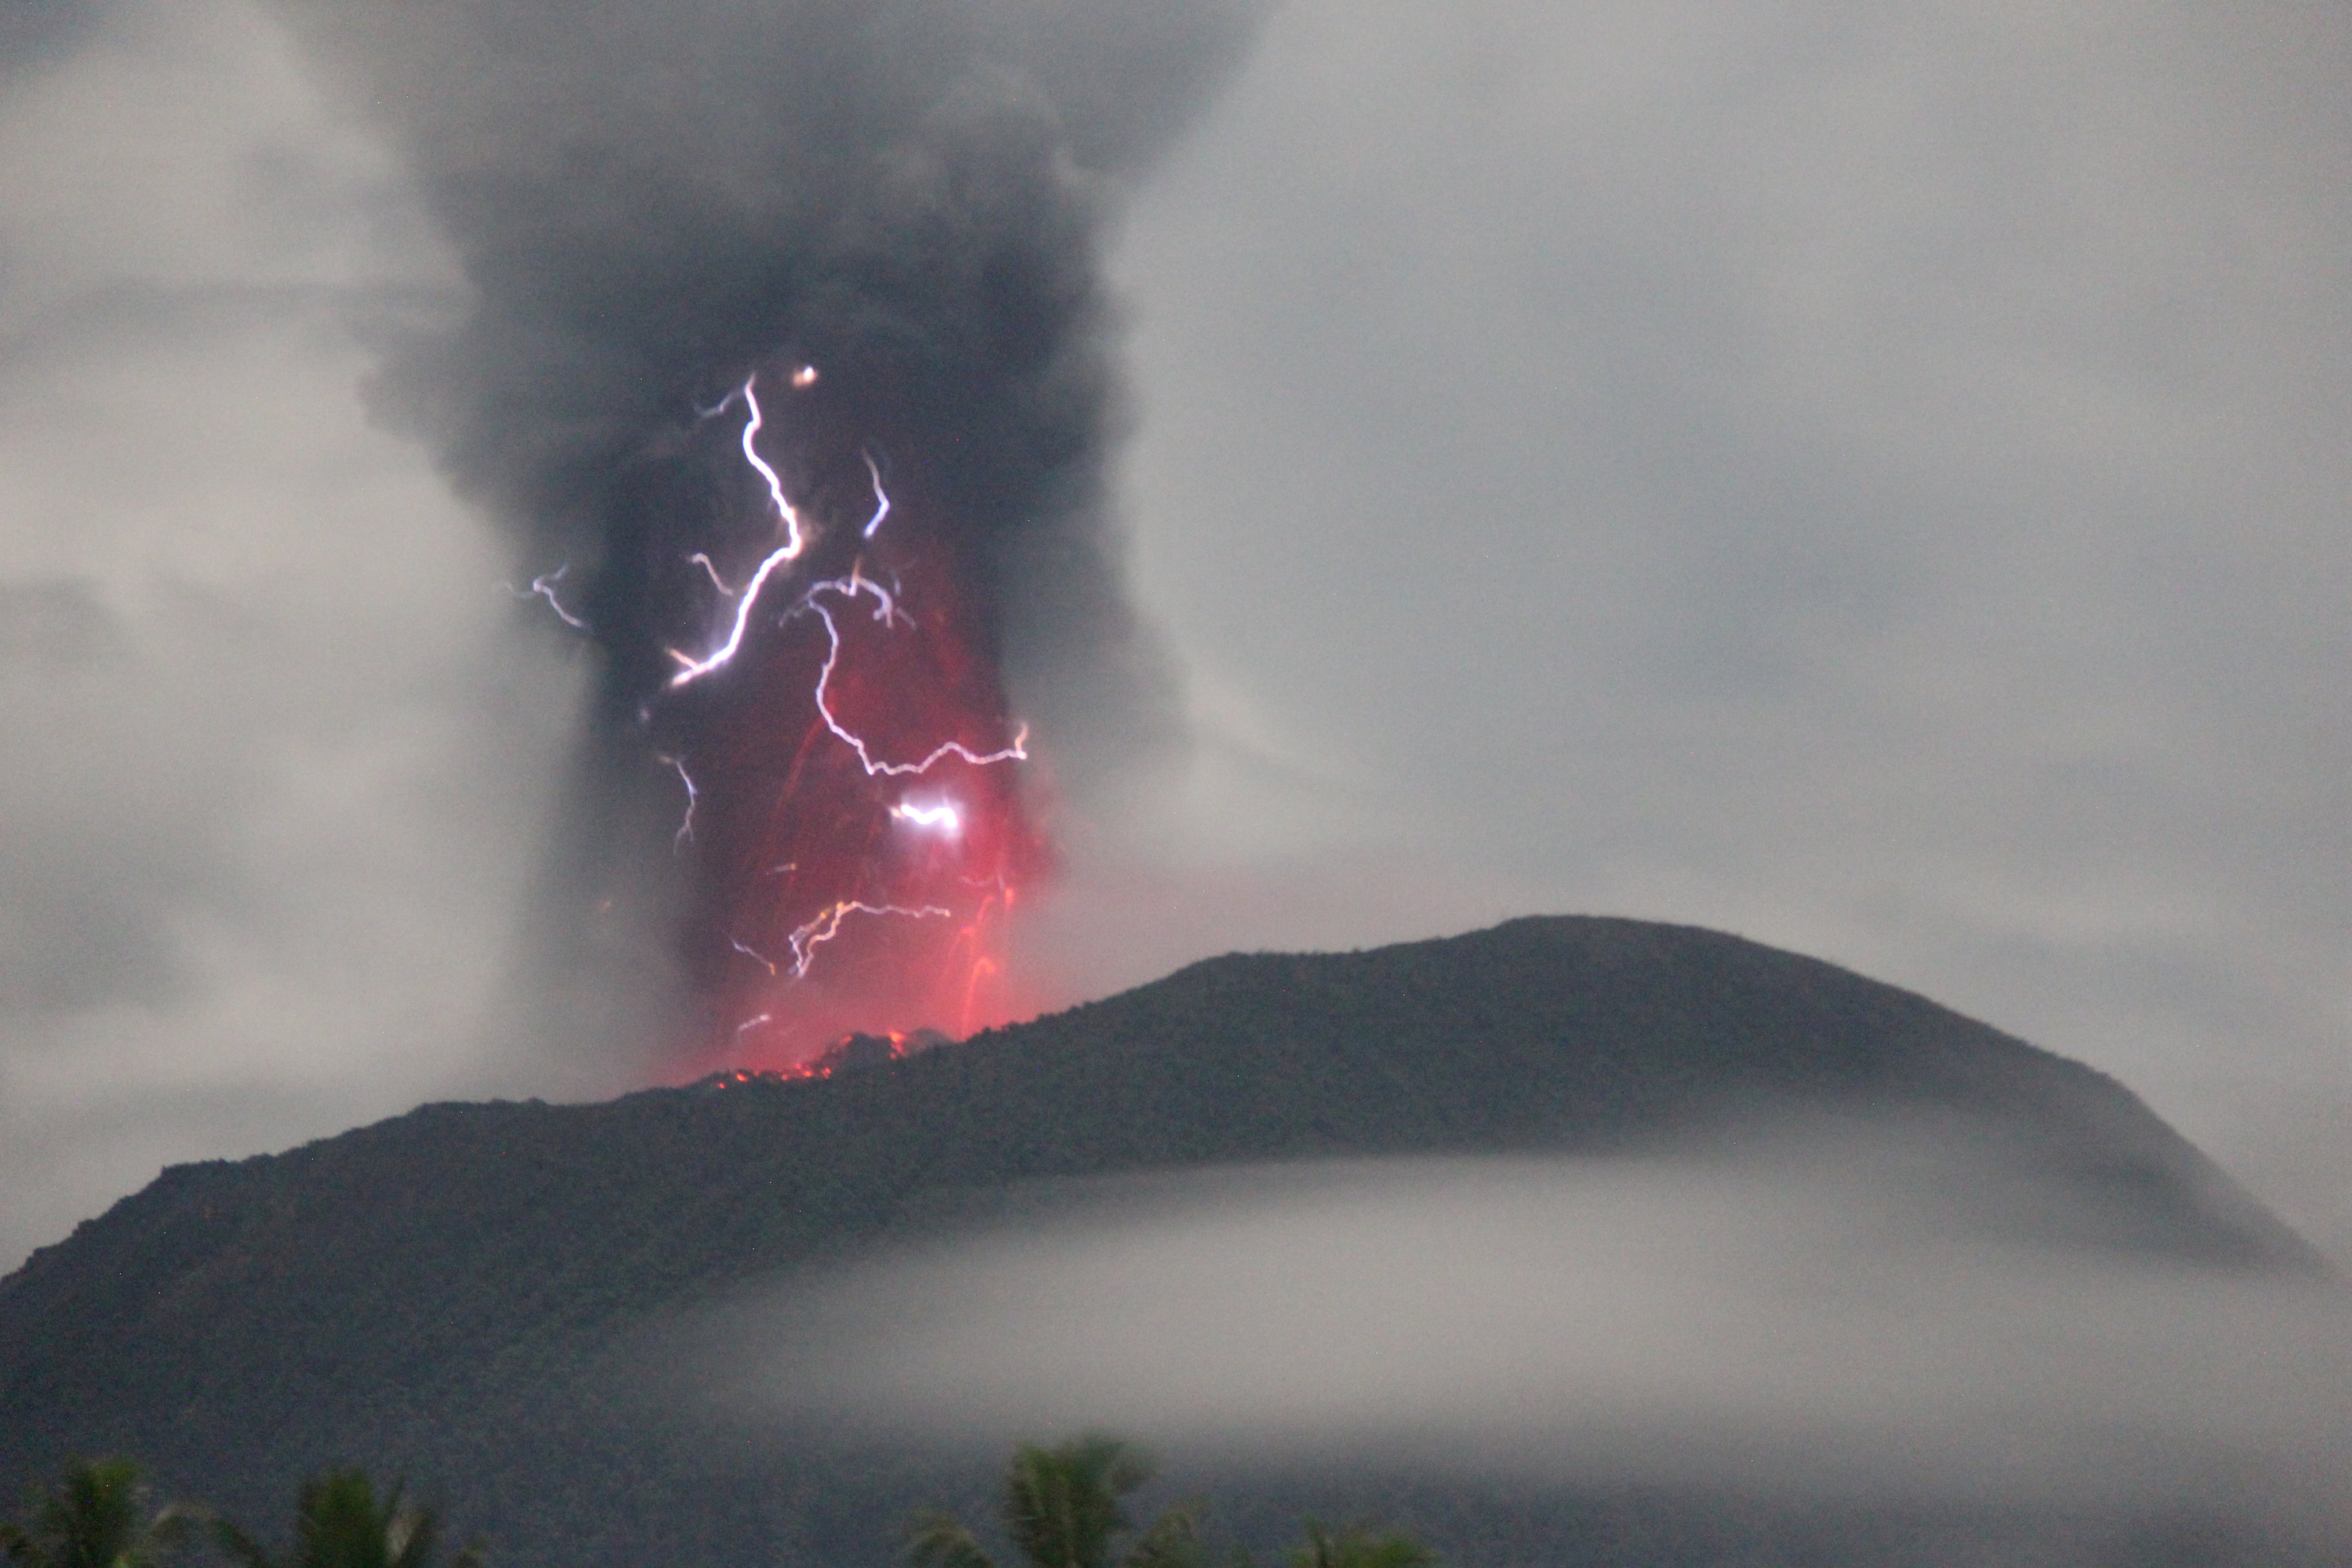 Lightning appears in a storm as Mount Ibu spews volcanic material during an eruption. Photo: Reuters